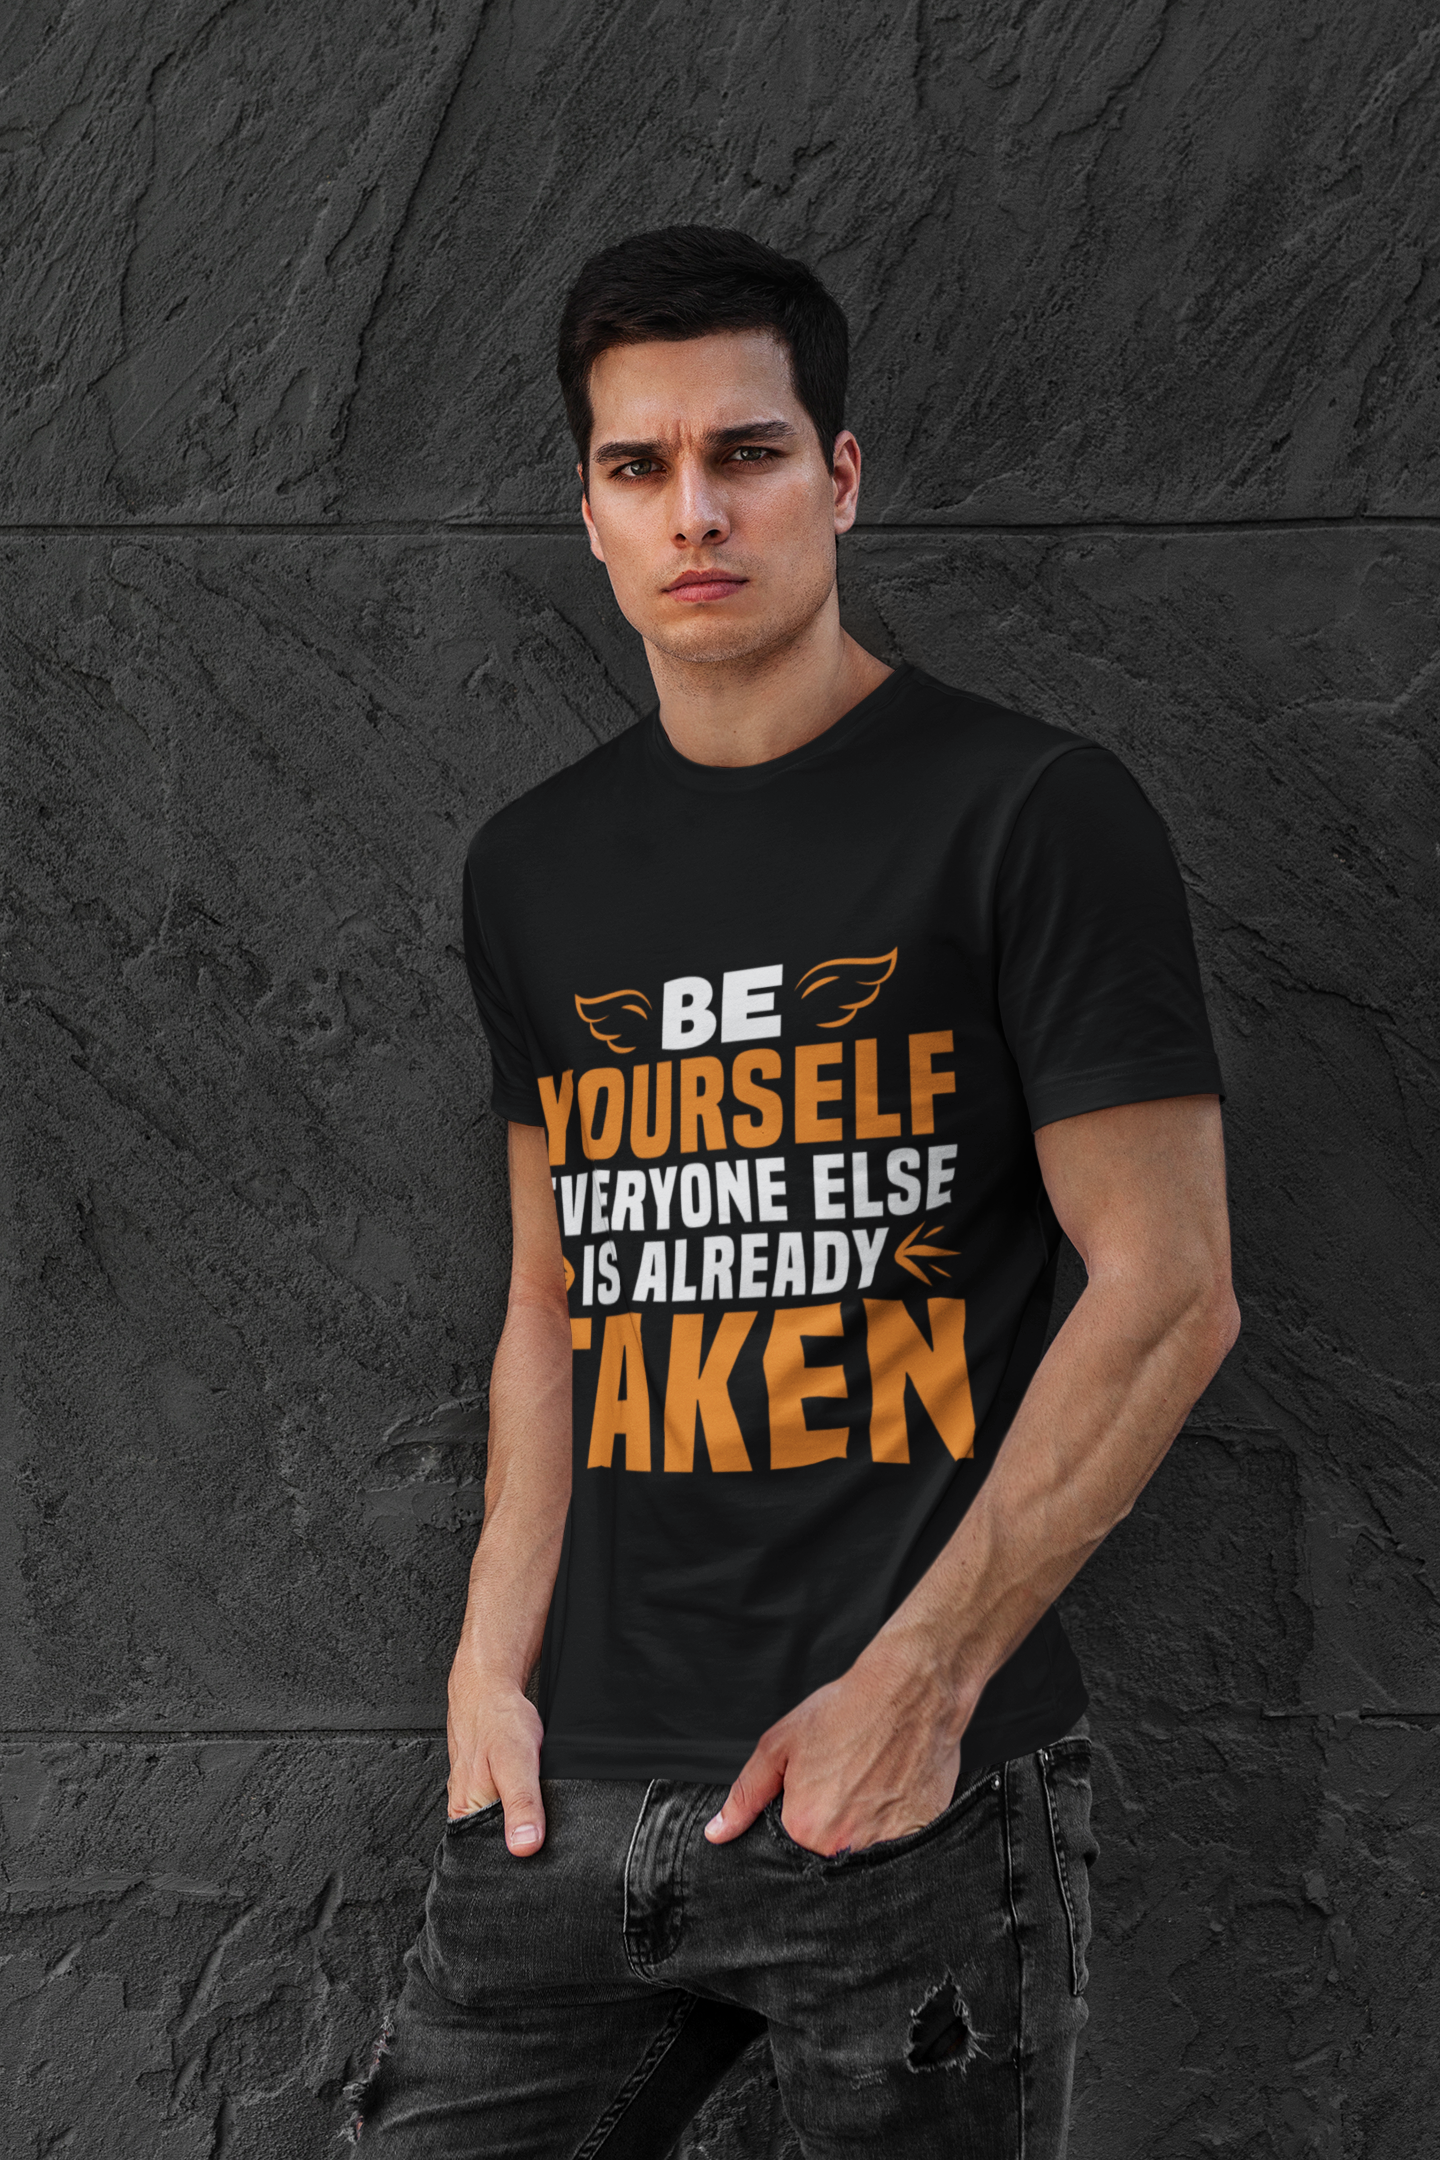 Printed T-shirt for men 100% Cotton half sleeve t-shirt (Be yourself)